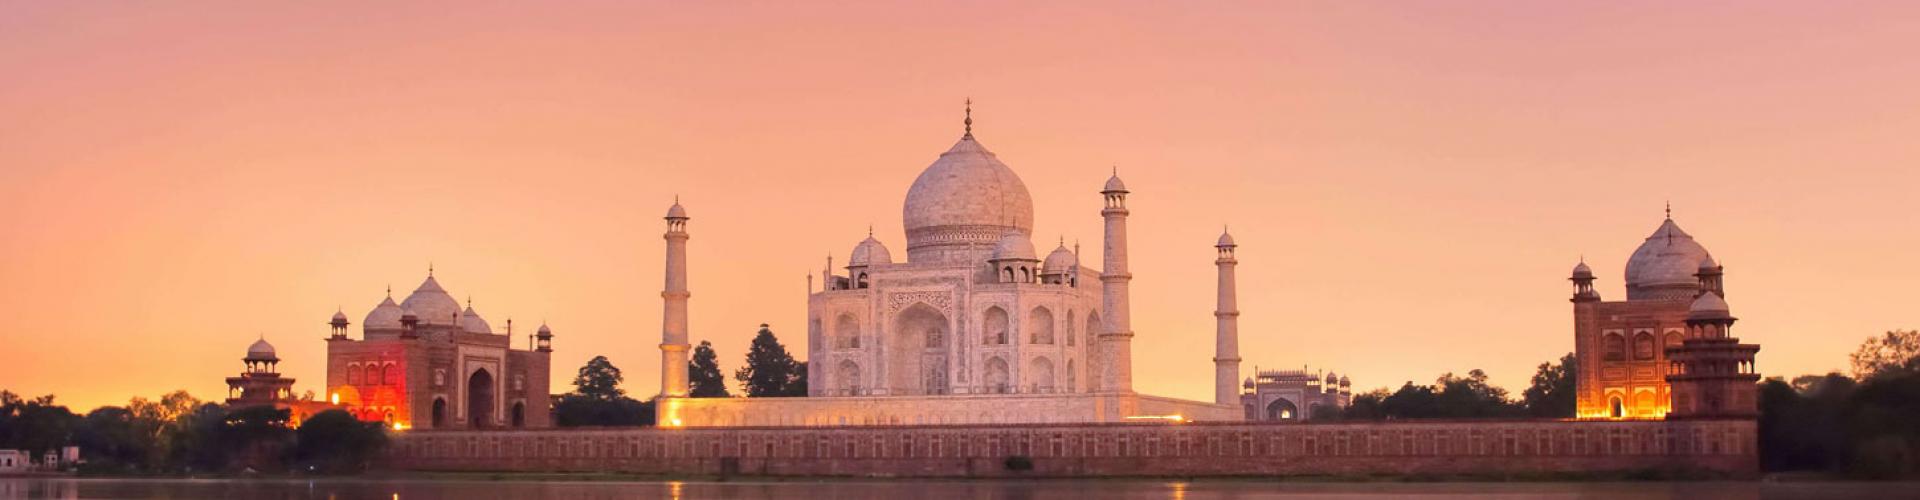 India tour packages from Ontario